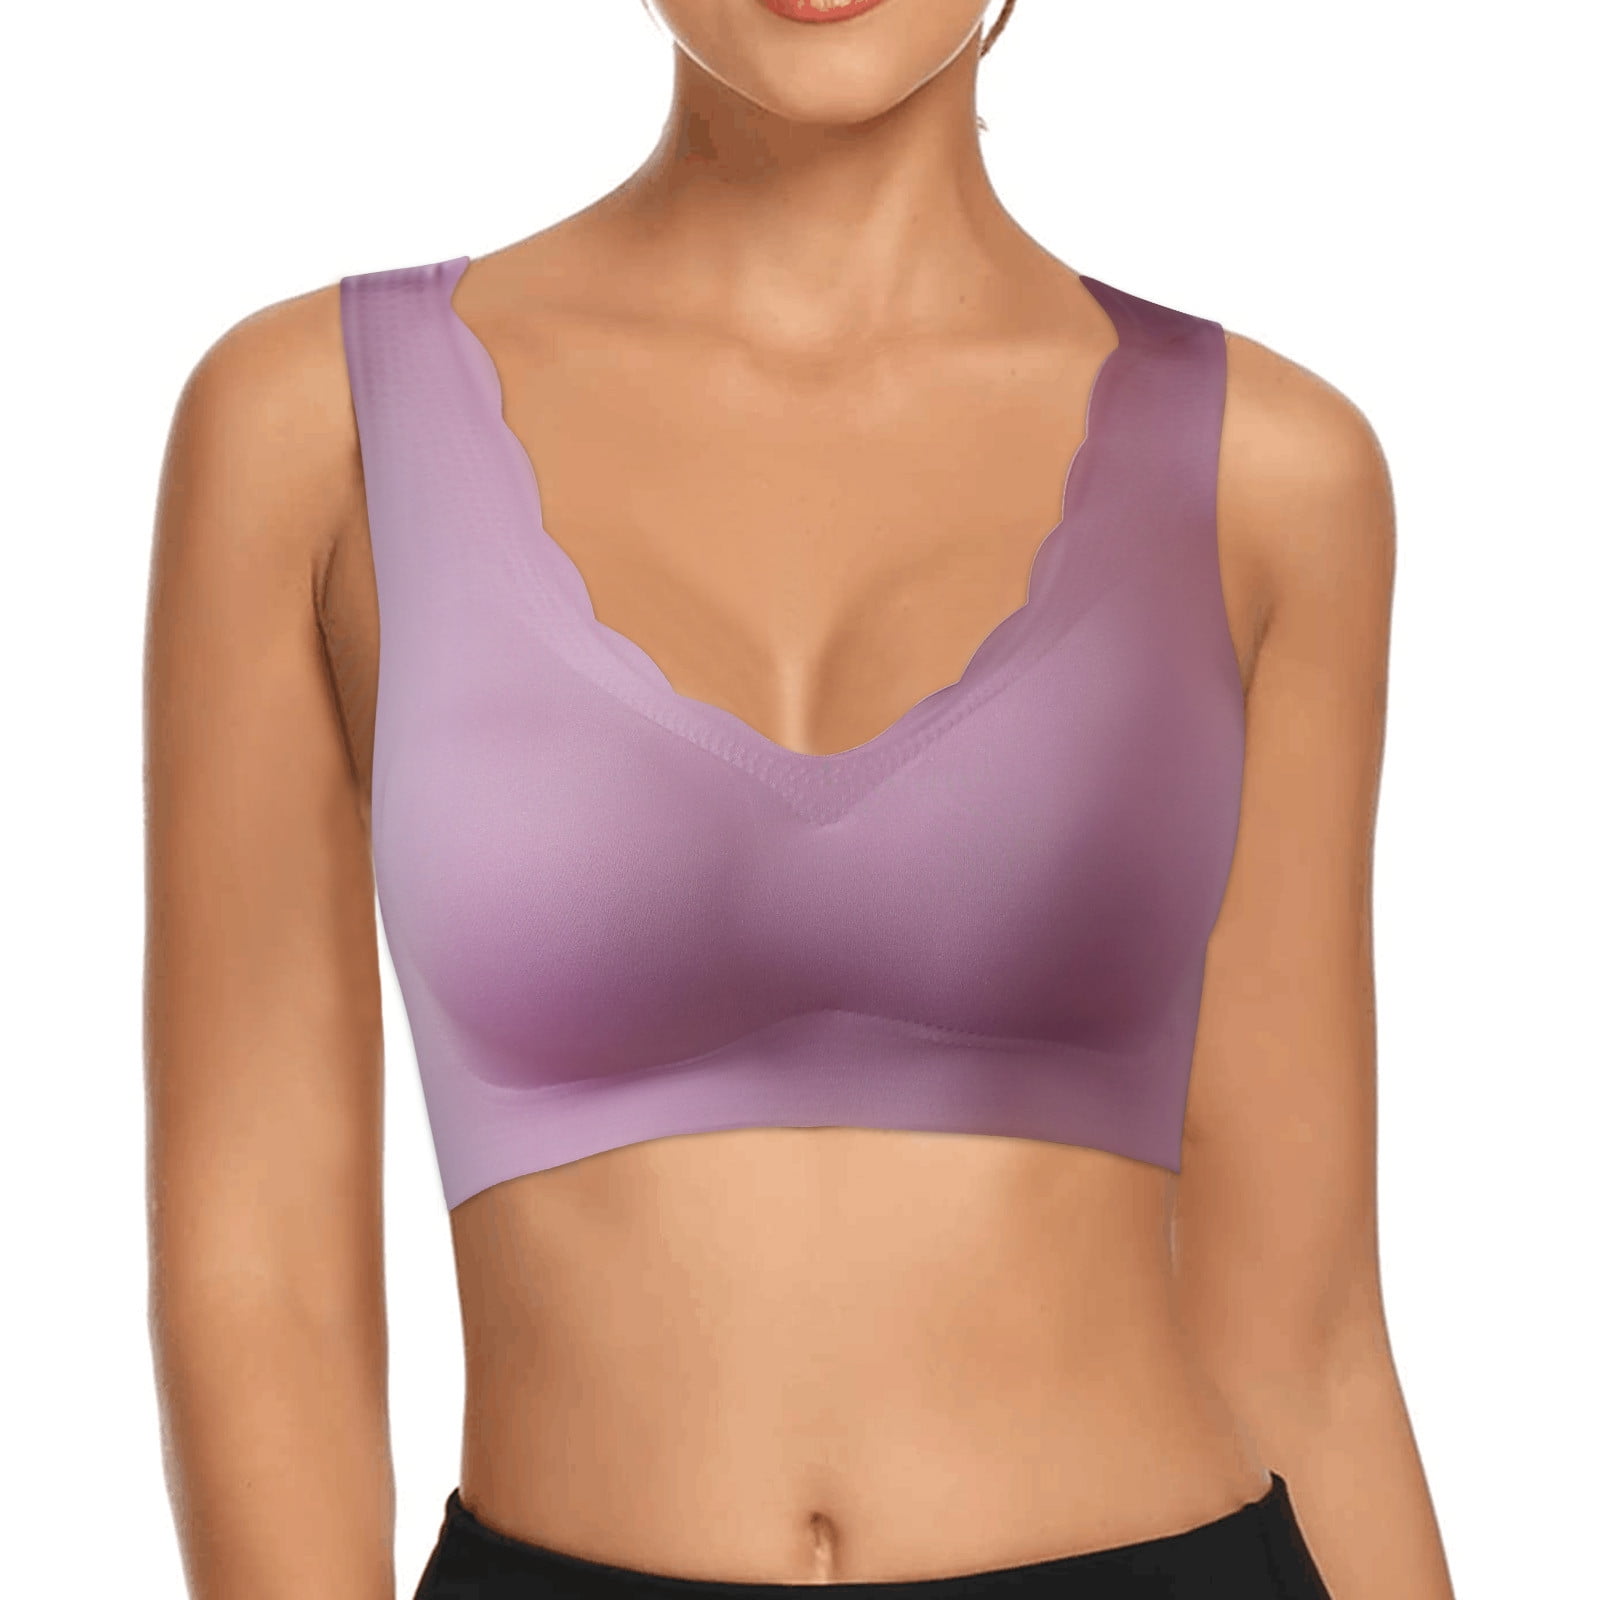 adviicd Tank Tops With Built In Bras Women's Push Up Bra Lace